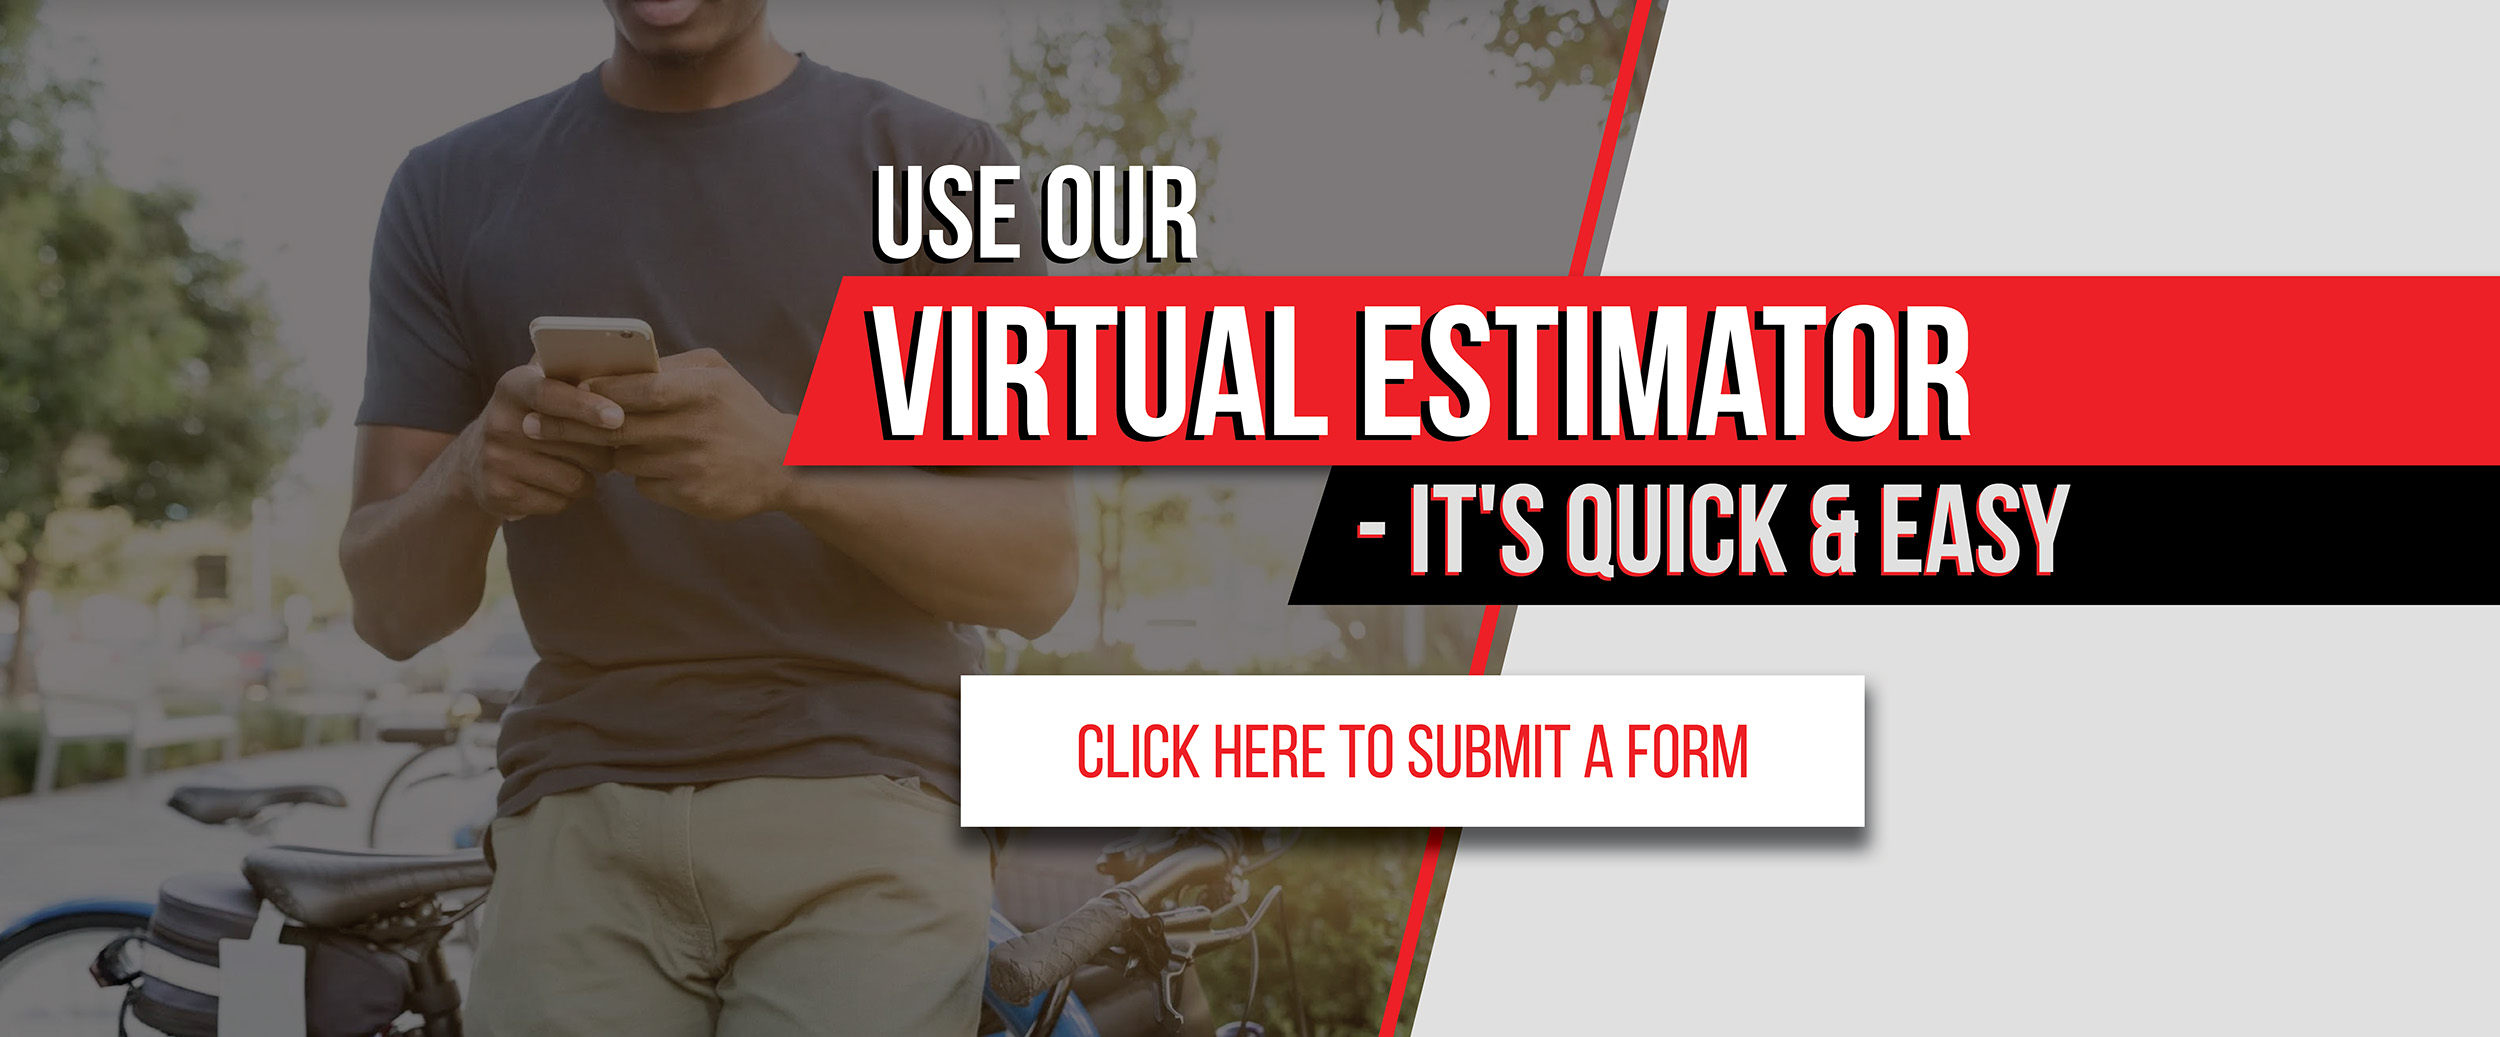 Use Our Virtual Estimator - It's Quick and Easy